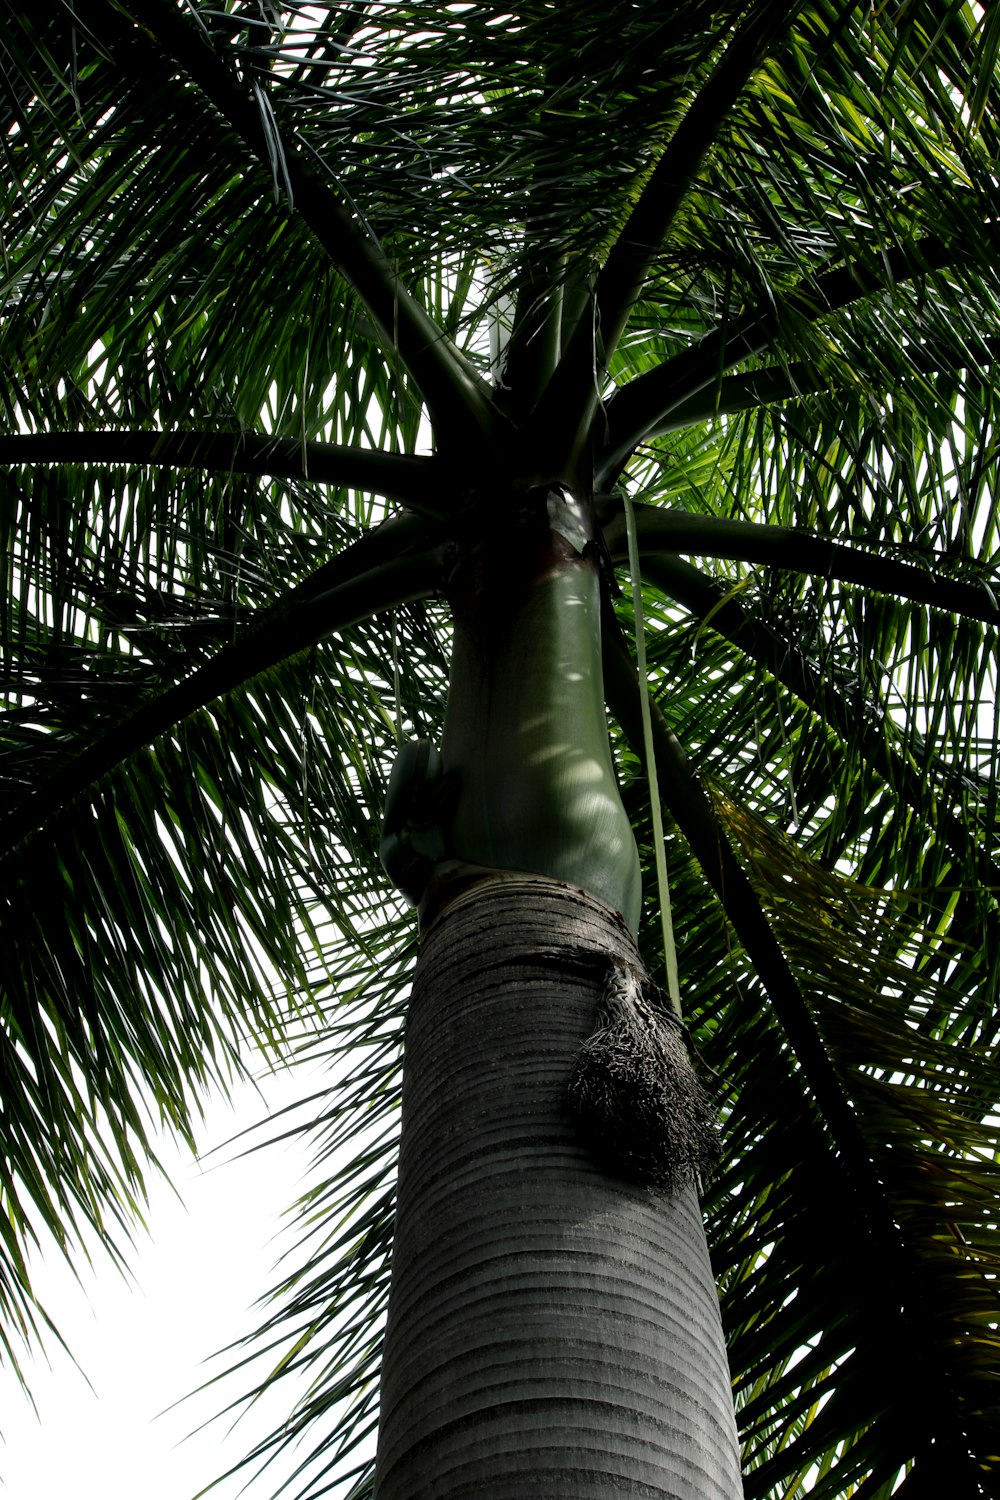 a tall palm tree with lots of green leaves